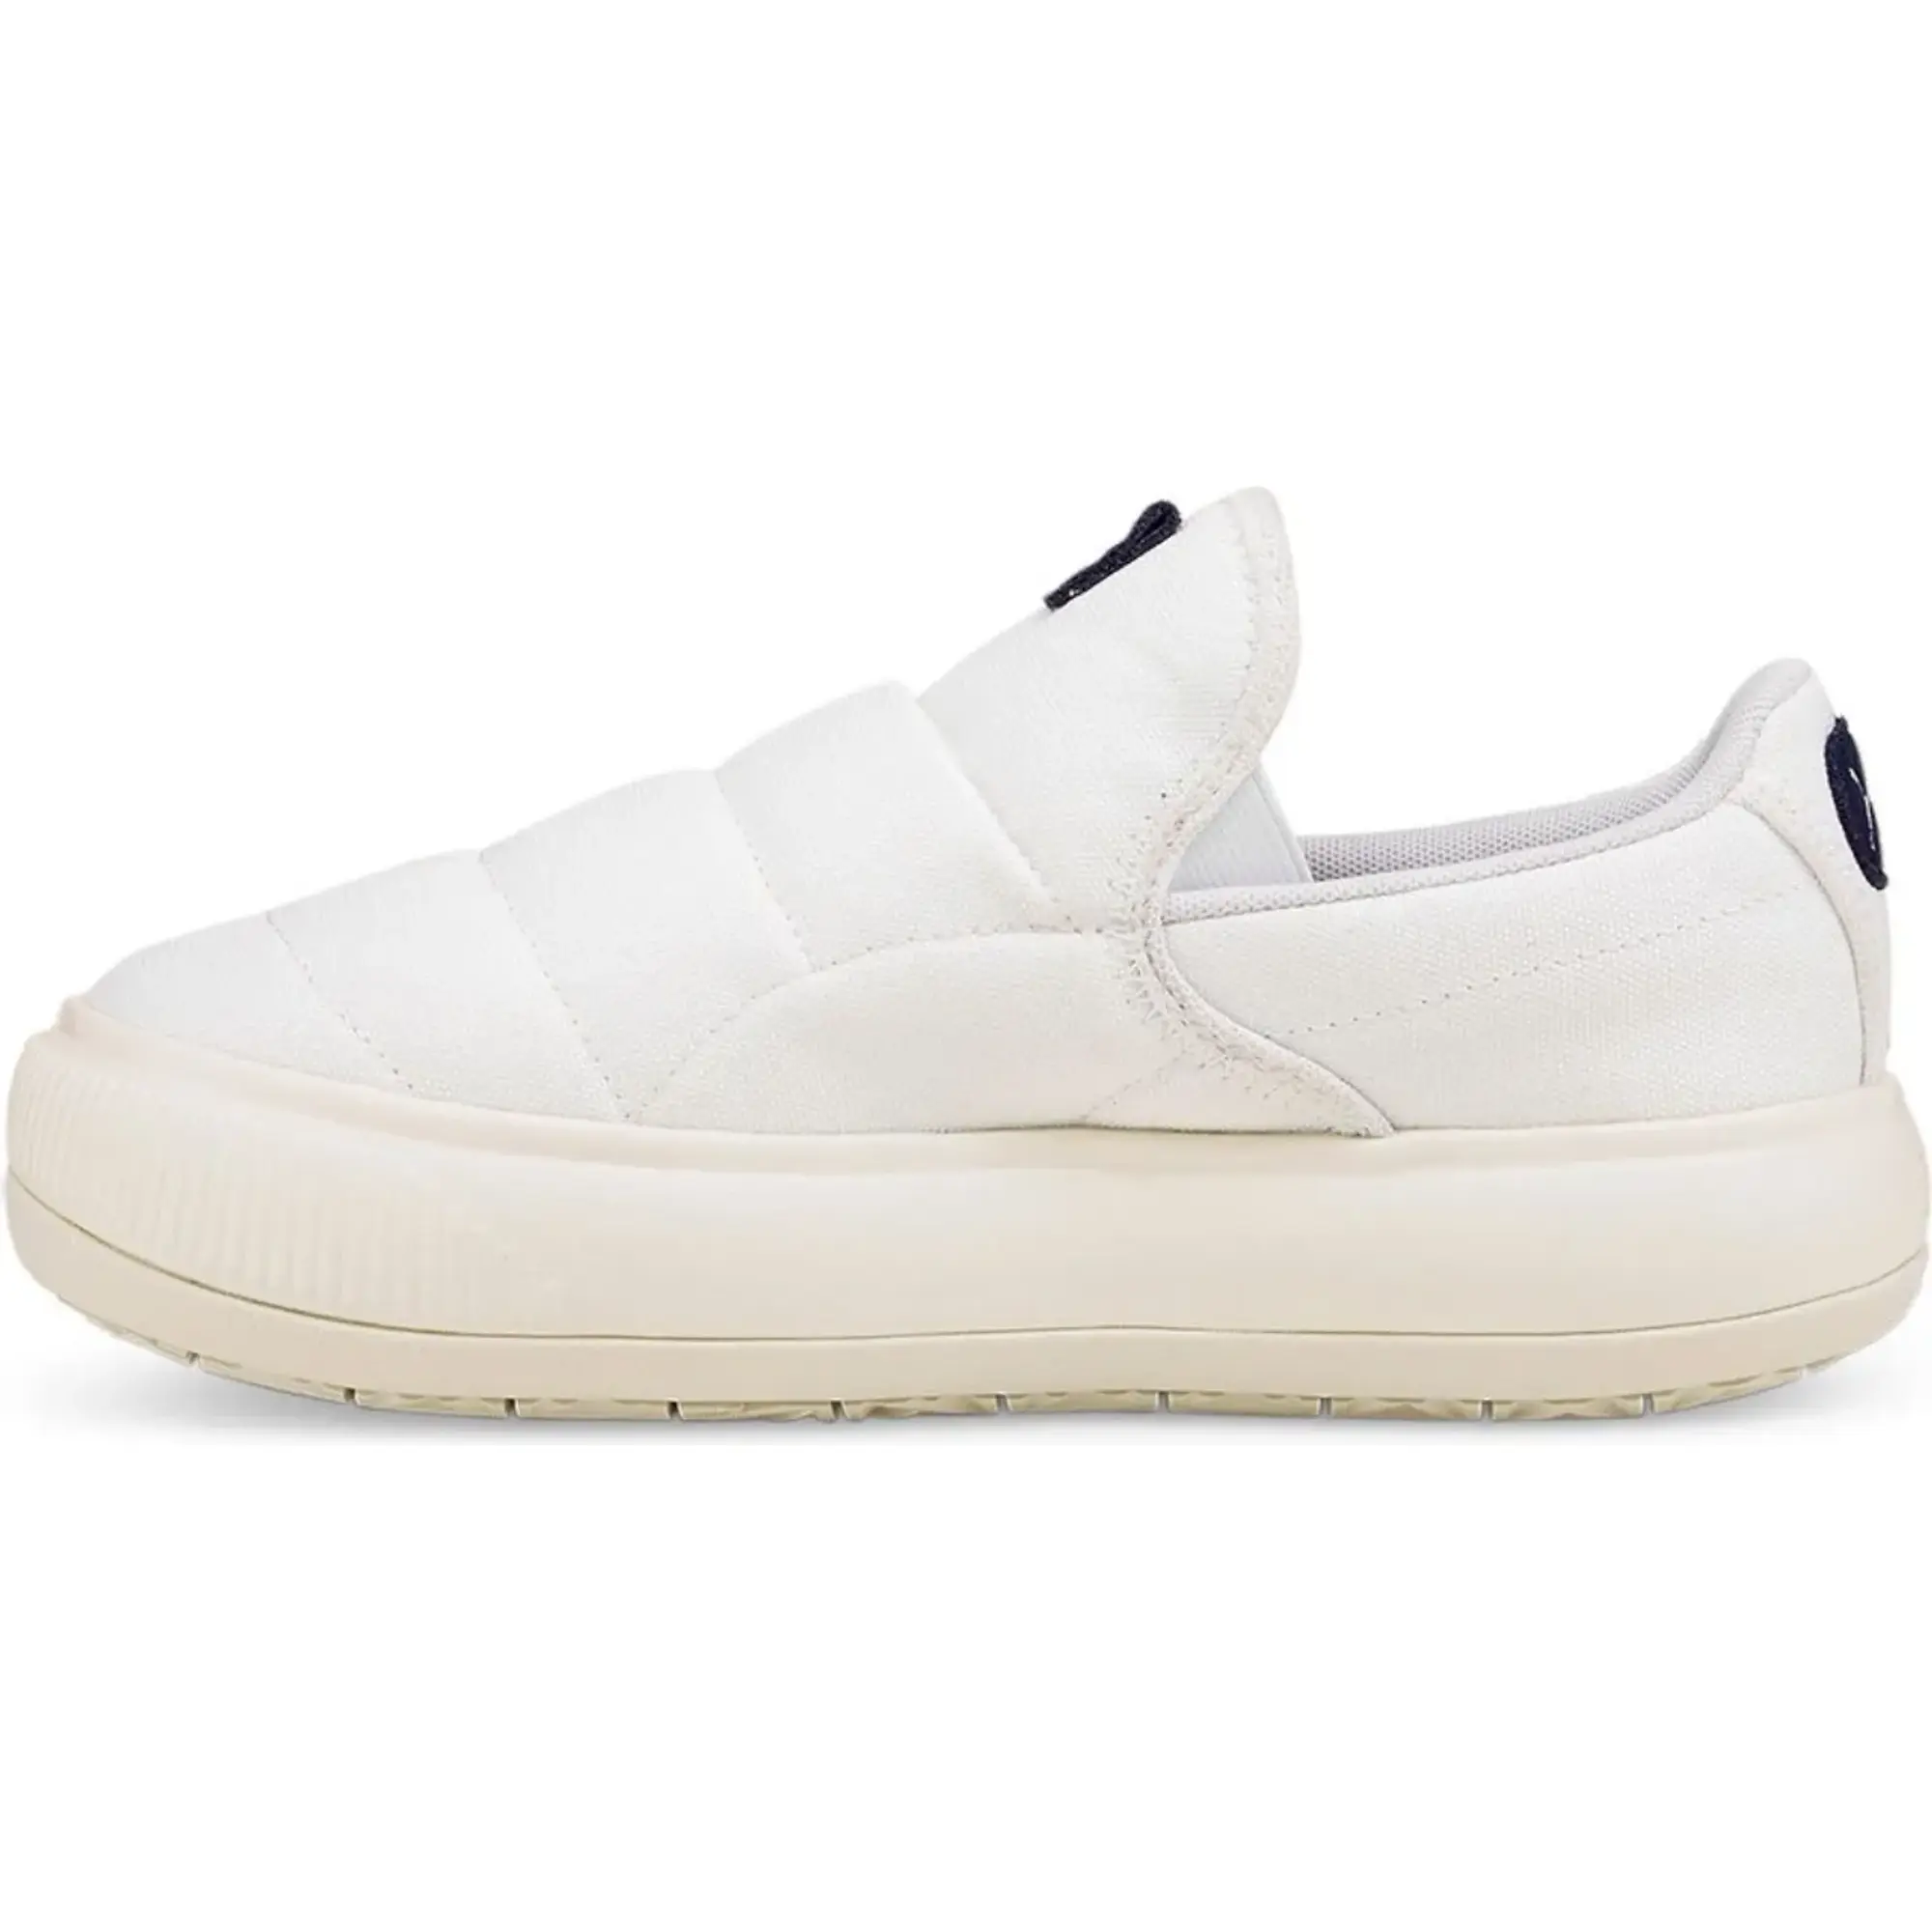 Puma Select Suede Mayu Slip-on Canvas Trainers  - White